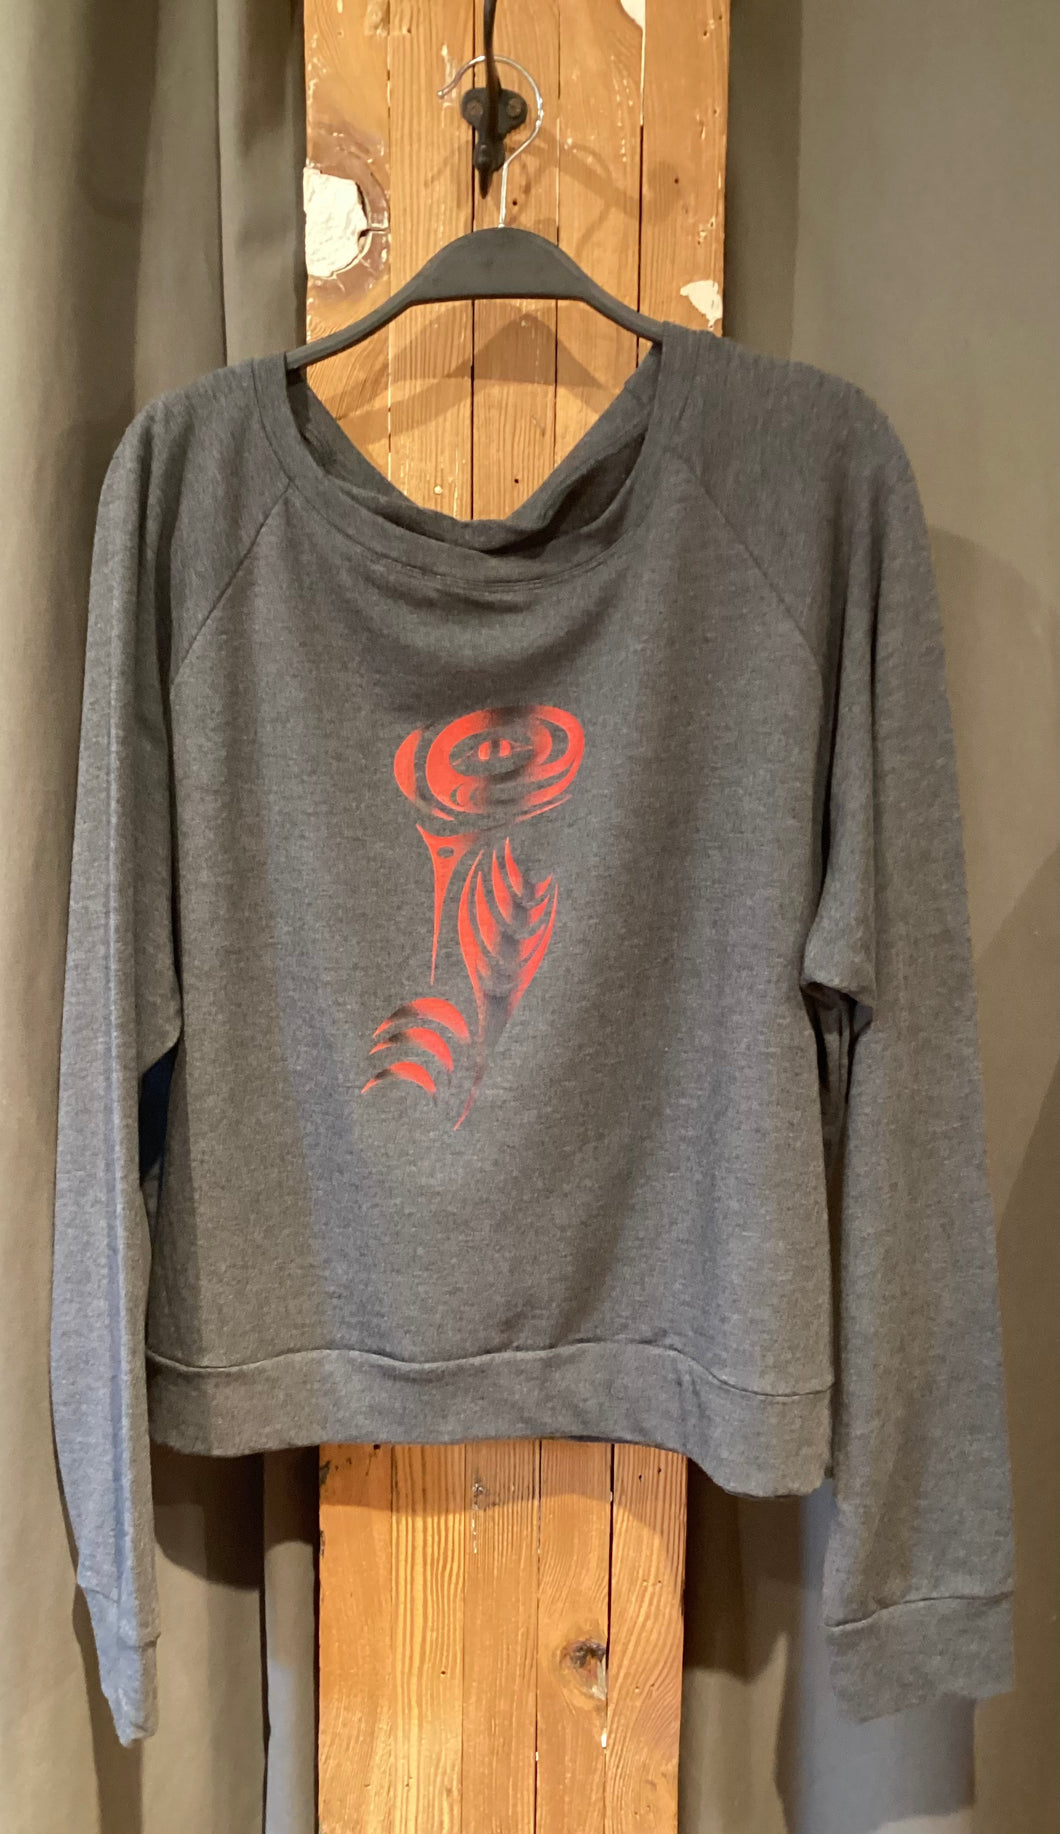 NM1-019 Women’s Pullover – Salmon Run/ Charcoal / Red